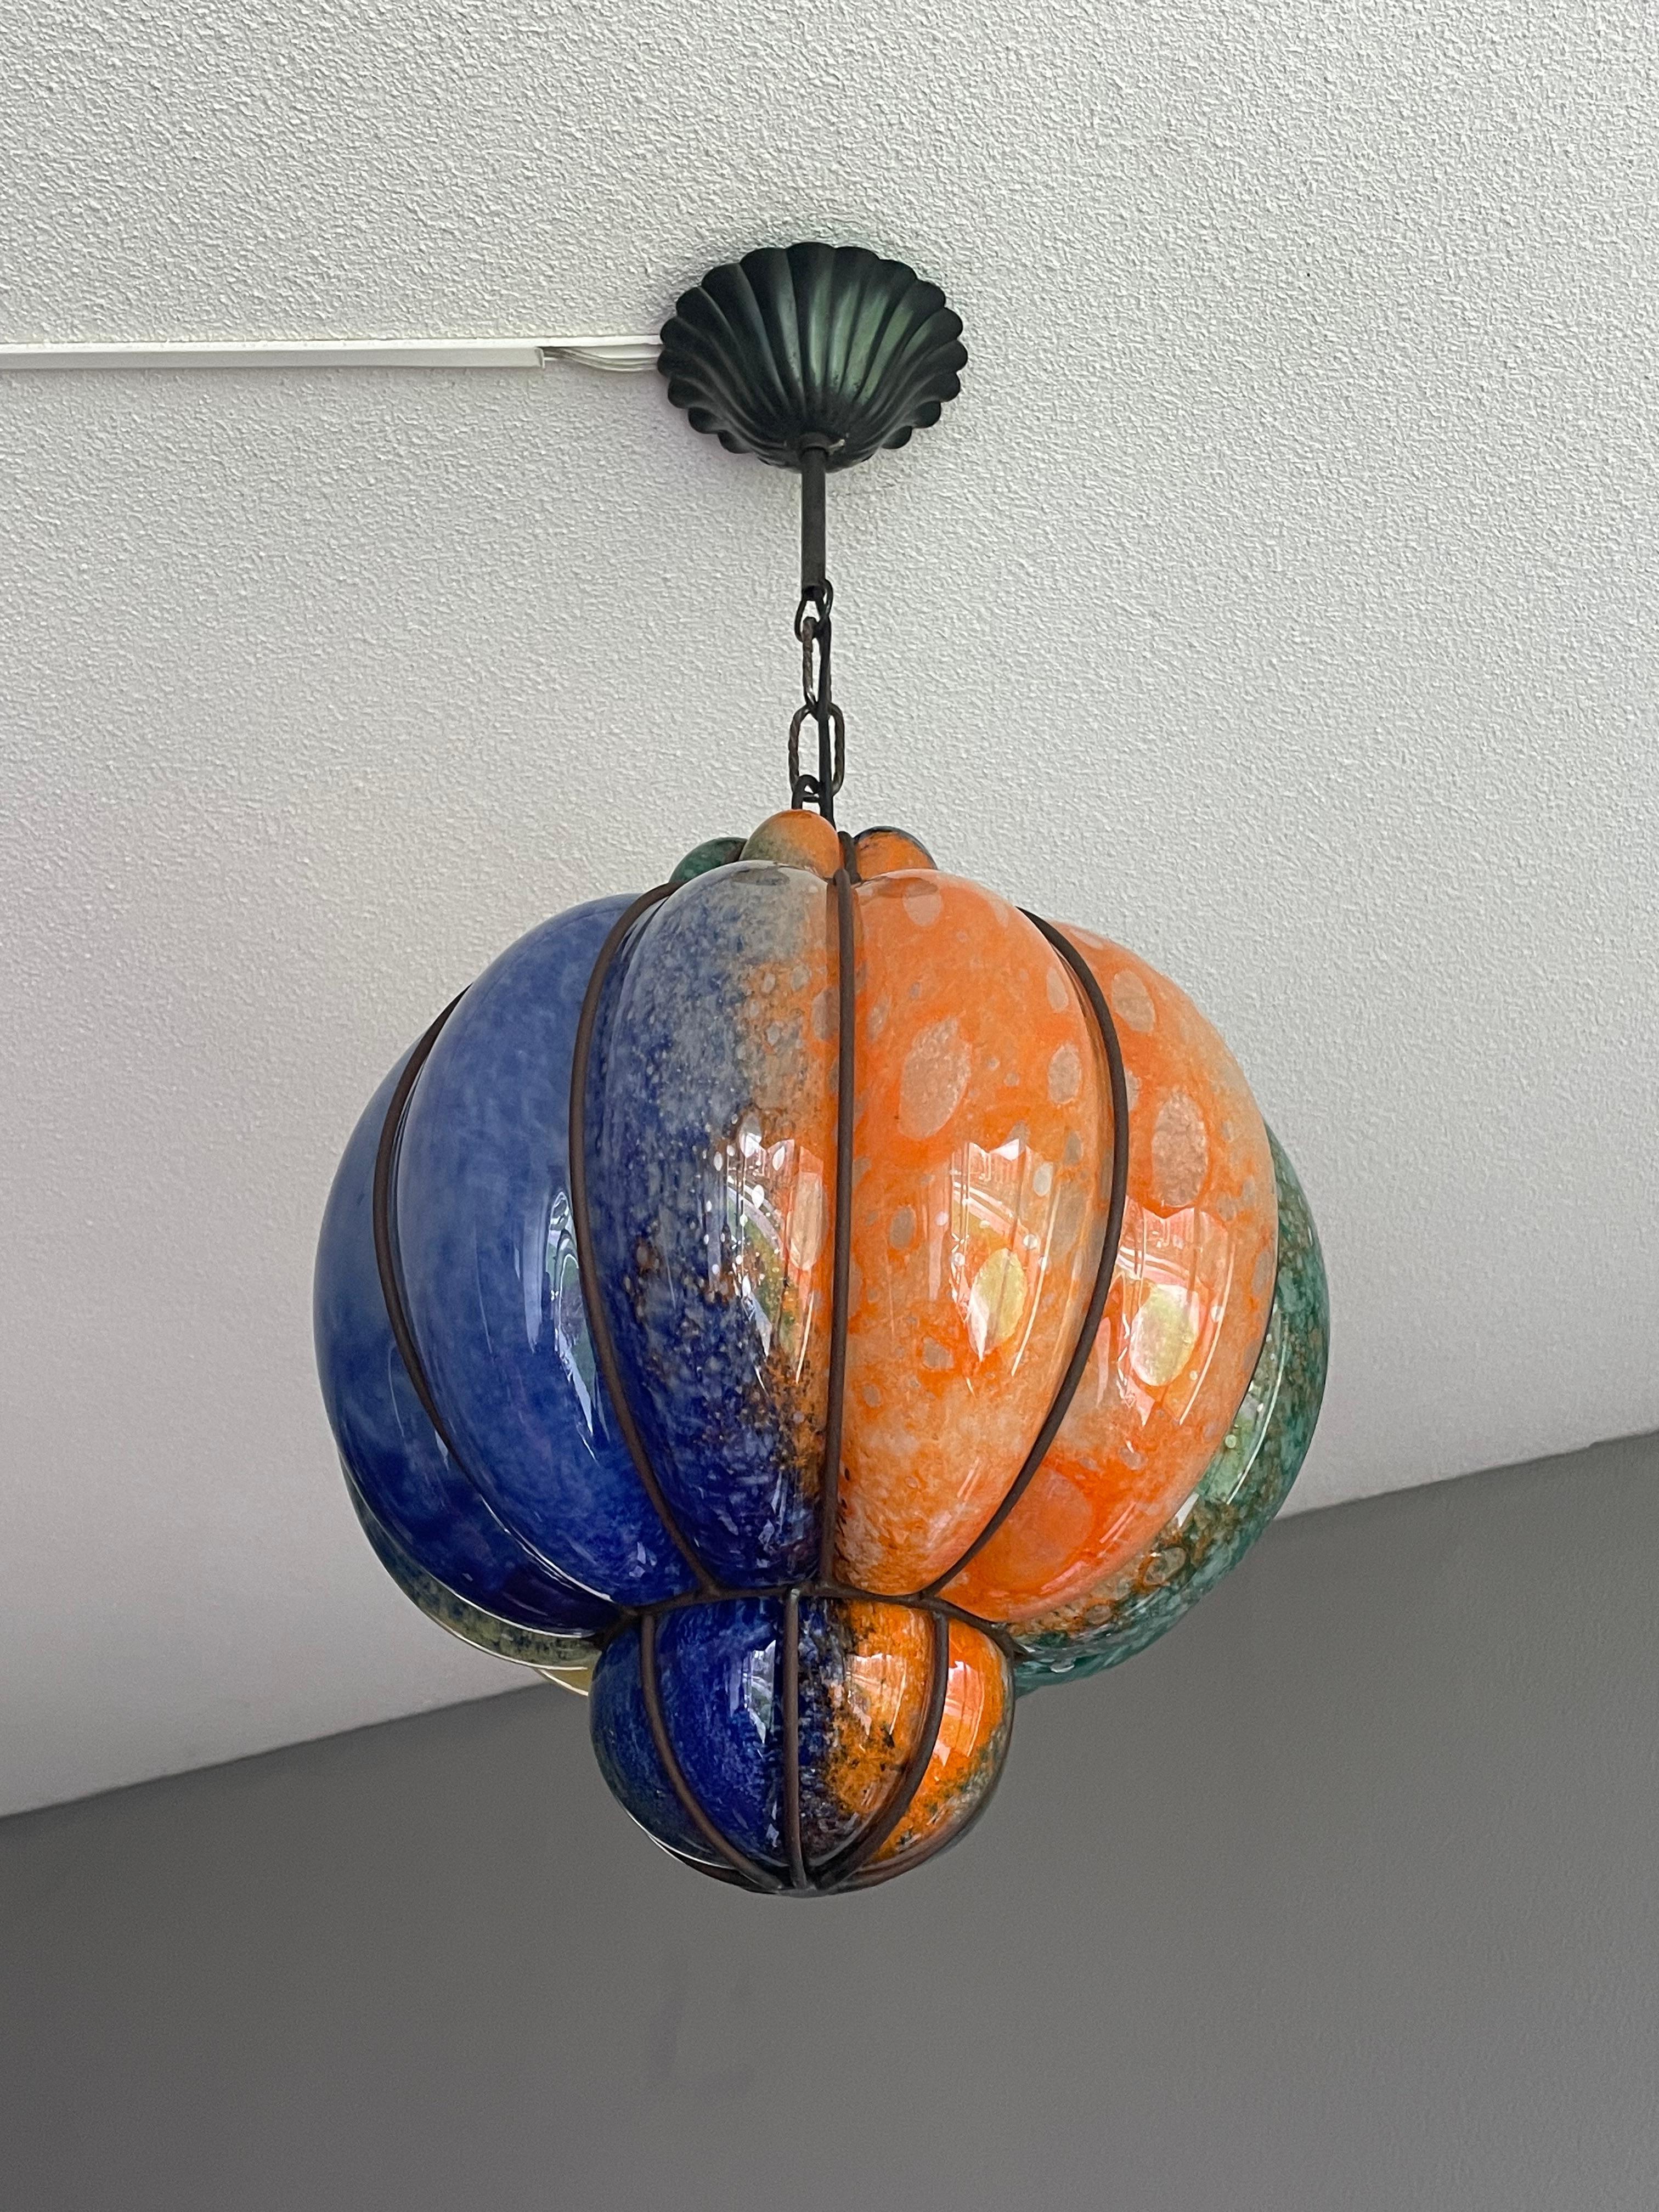 Remarkable Murano light fixture with painter's pallete-like colors.

One of the reasons why we think we have the best job in the world is that we keep finding beautiful and all handcrafted antiques that we have never seen before. We have sold mouth